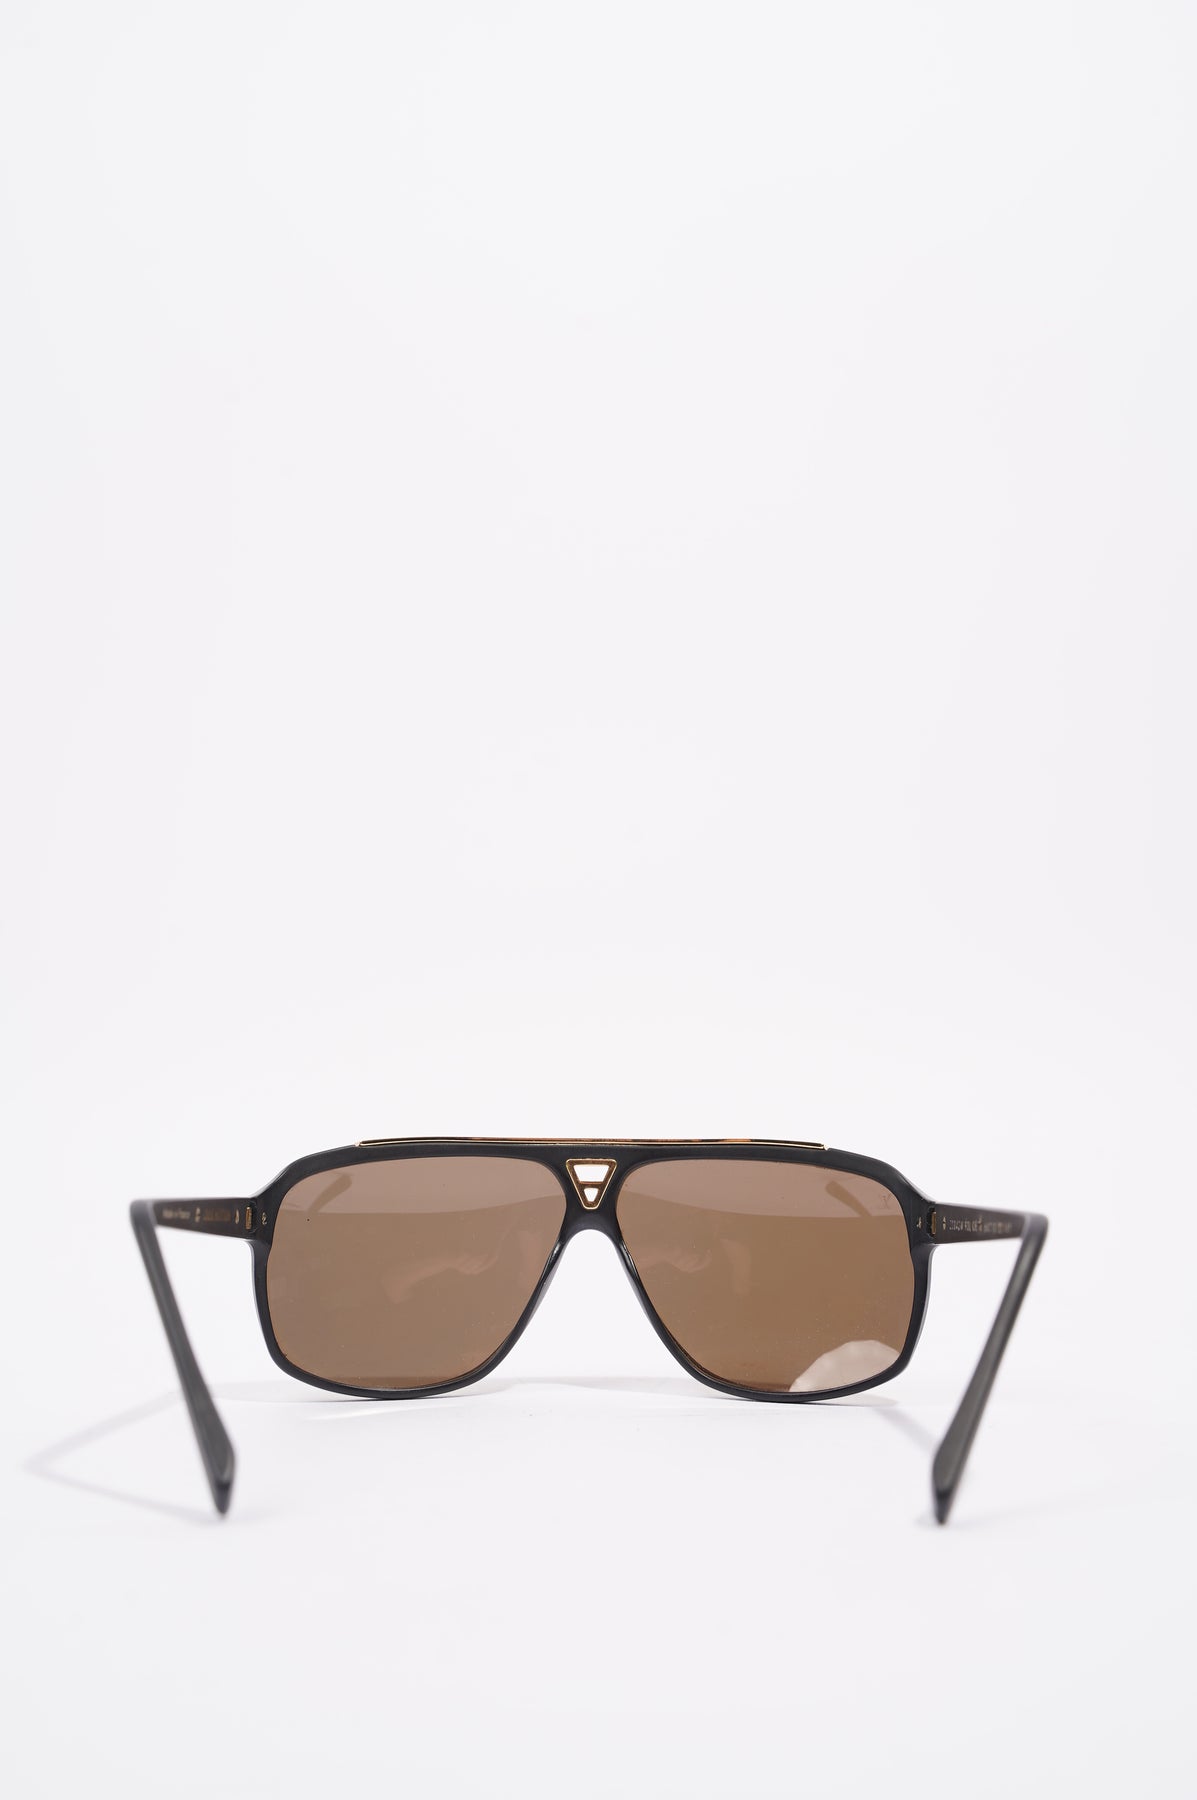 Louis Vuitton Evidence Sunglasses Black / Gold 140 – Luxe Collective